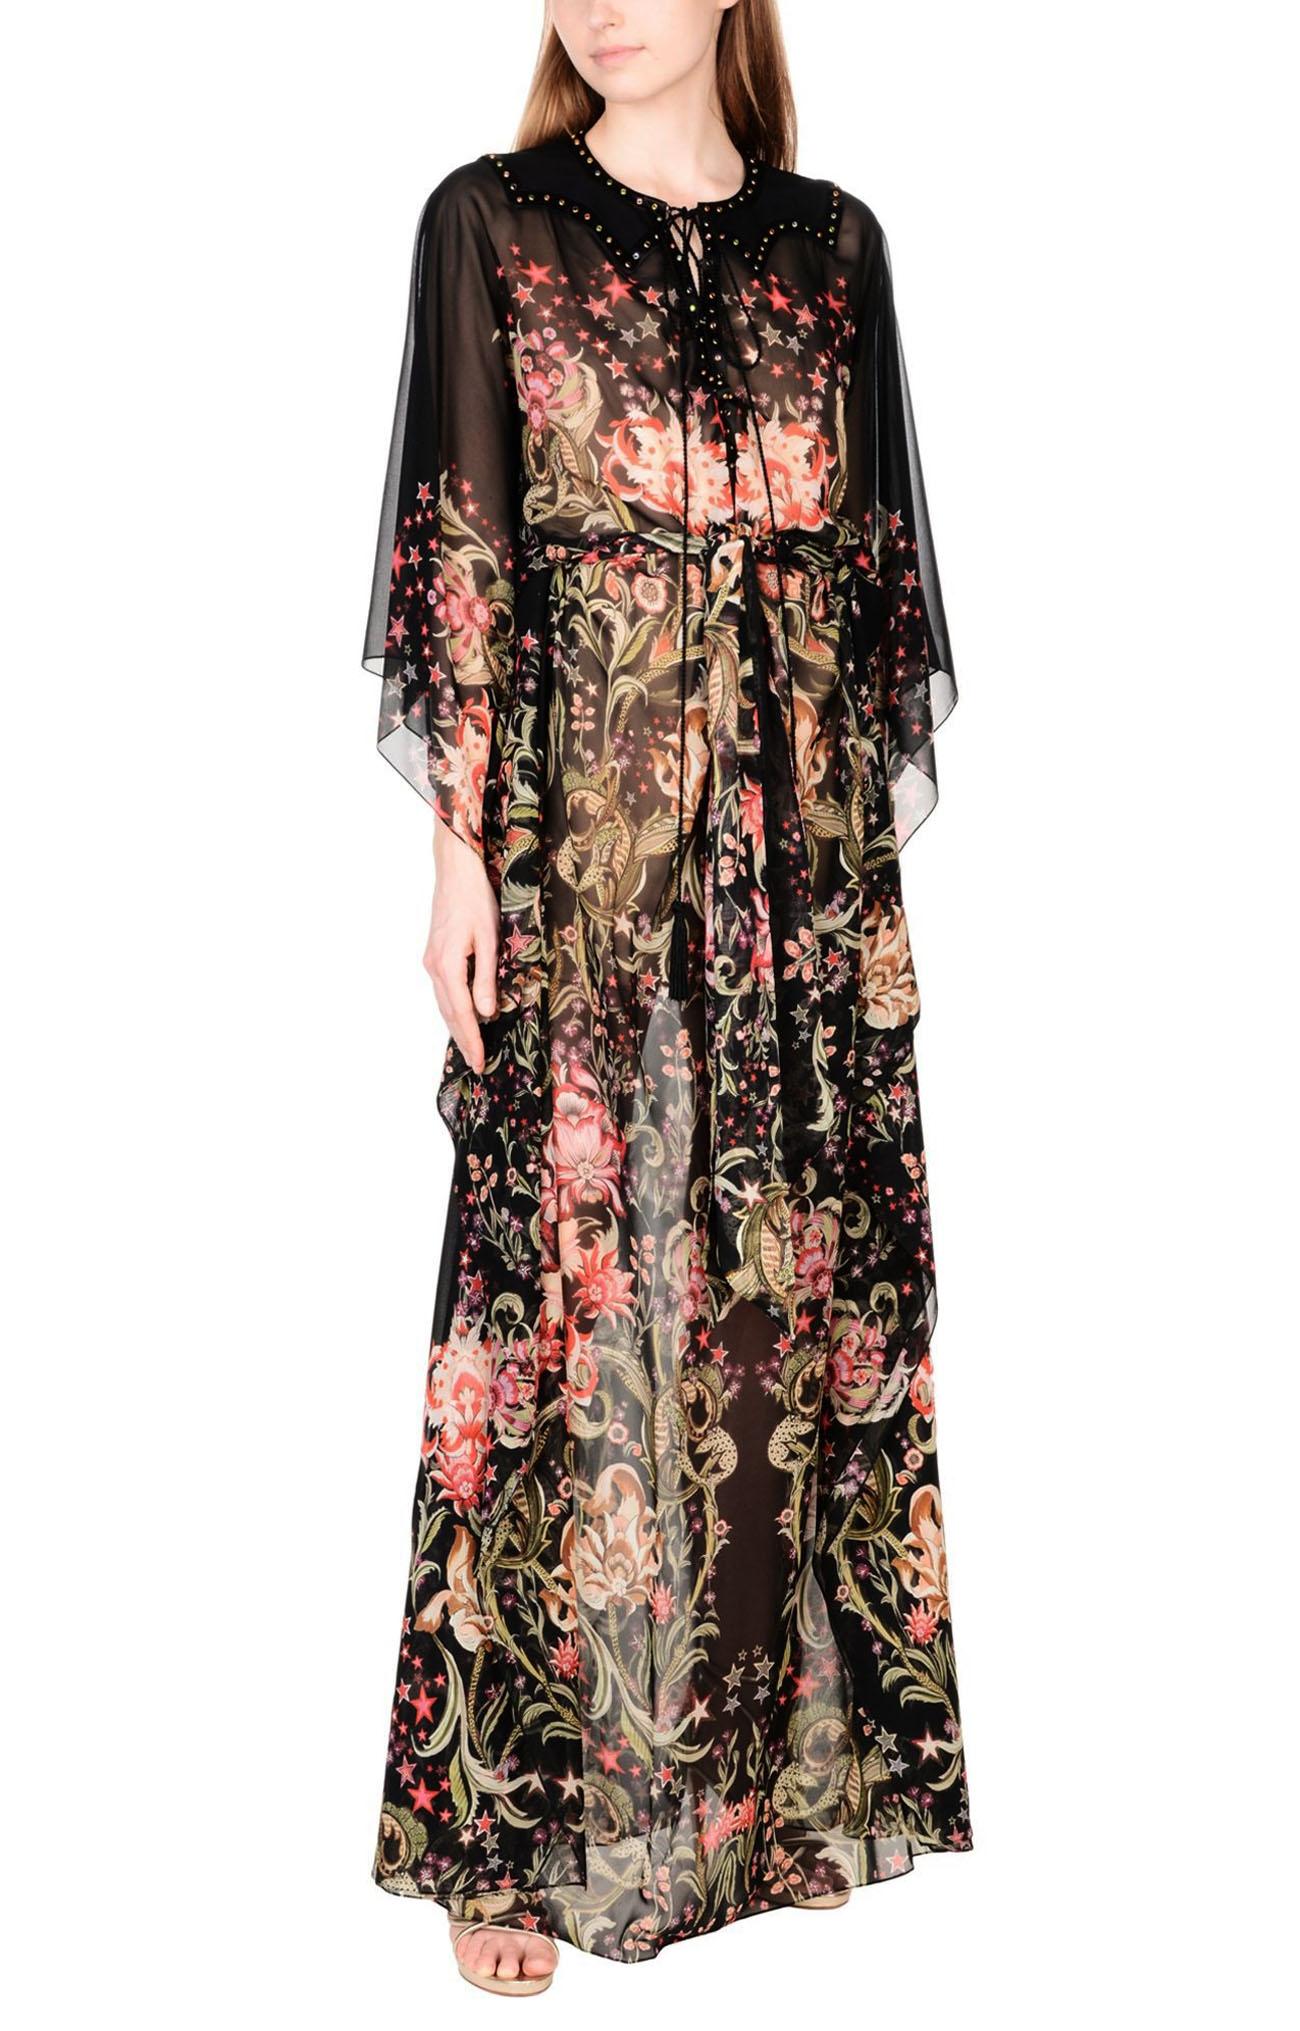 New Roberto Cavalli Silk Caftan-Style Belted Dress Gown
Designer size - 40 ( will fit also bigger sizes)
100% Silk, Floral Print, Multi-color Studded Detail, Lace-Up Front Closure, Detachable Belt, No lining.
Measurements: Length - 65 inches, Armpit